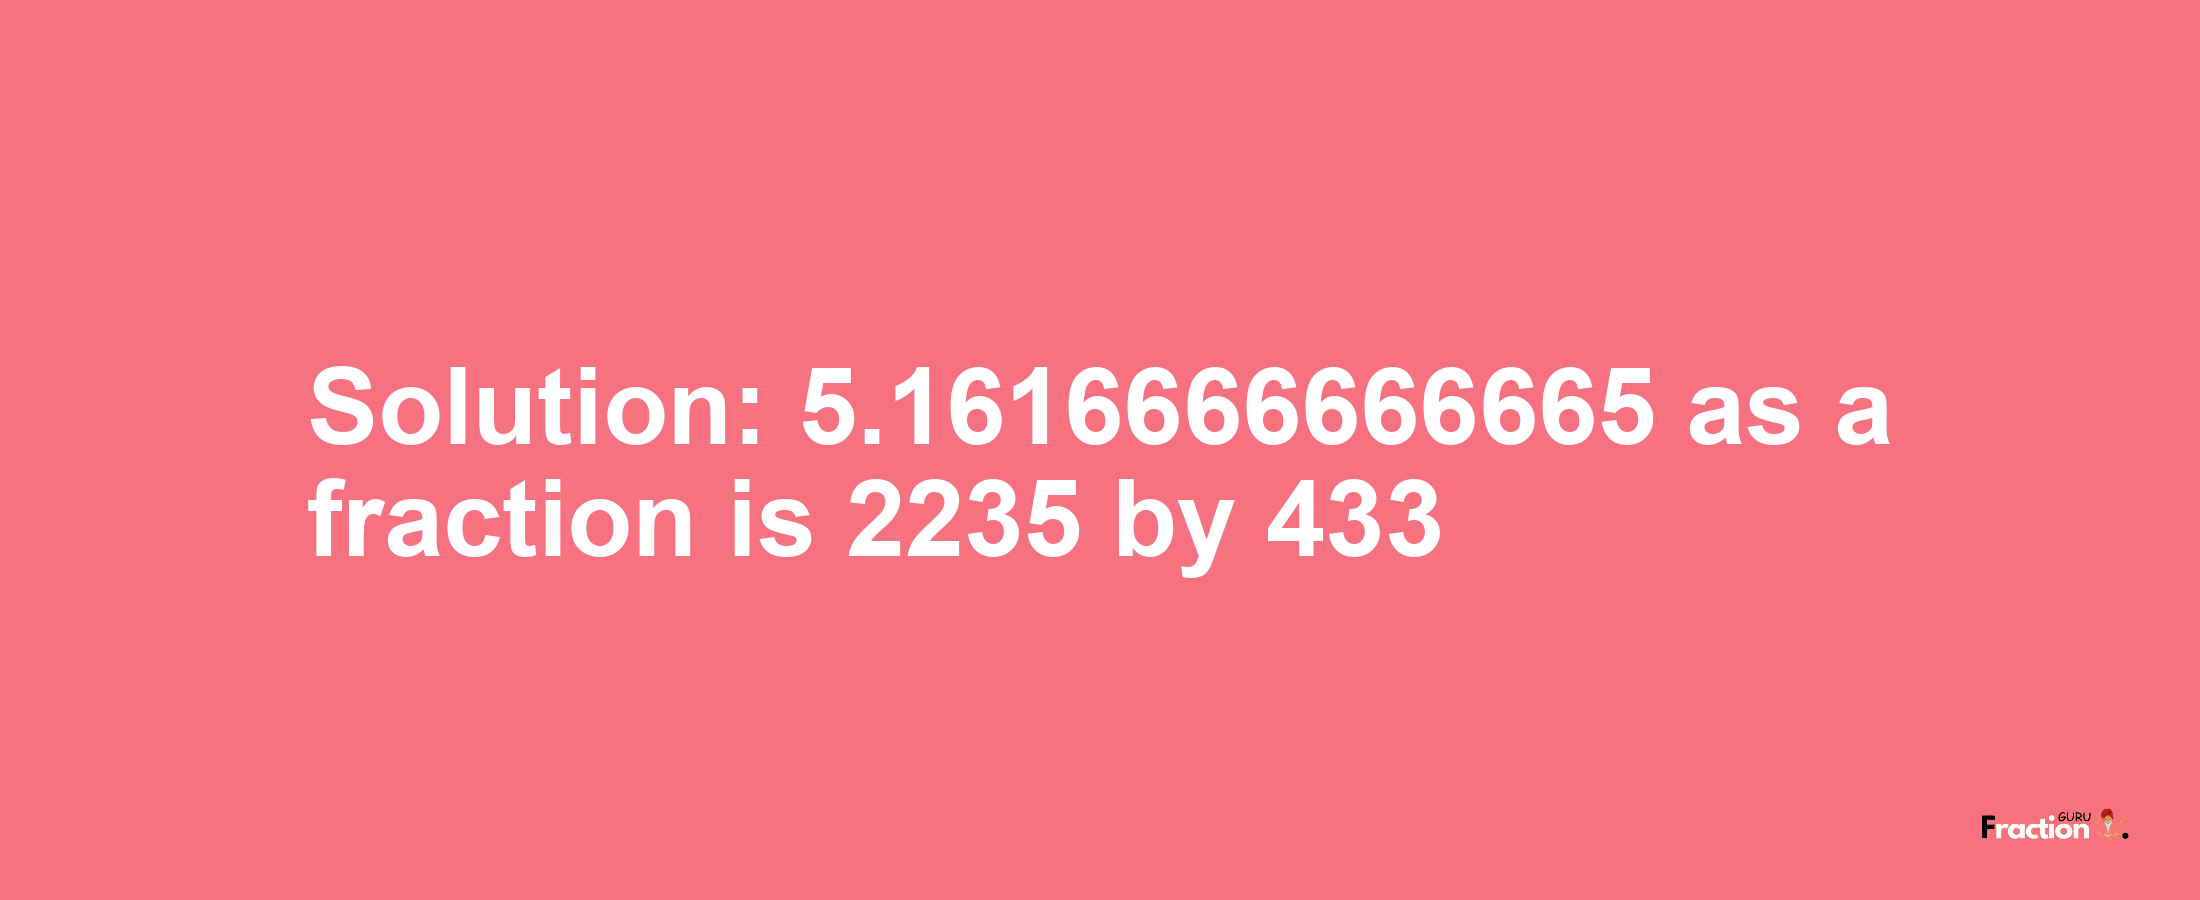 Solution:5.1616666666665 as a fraction is 2235/433